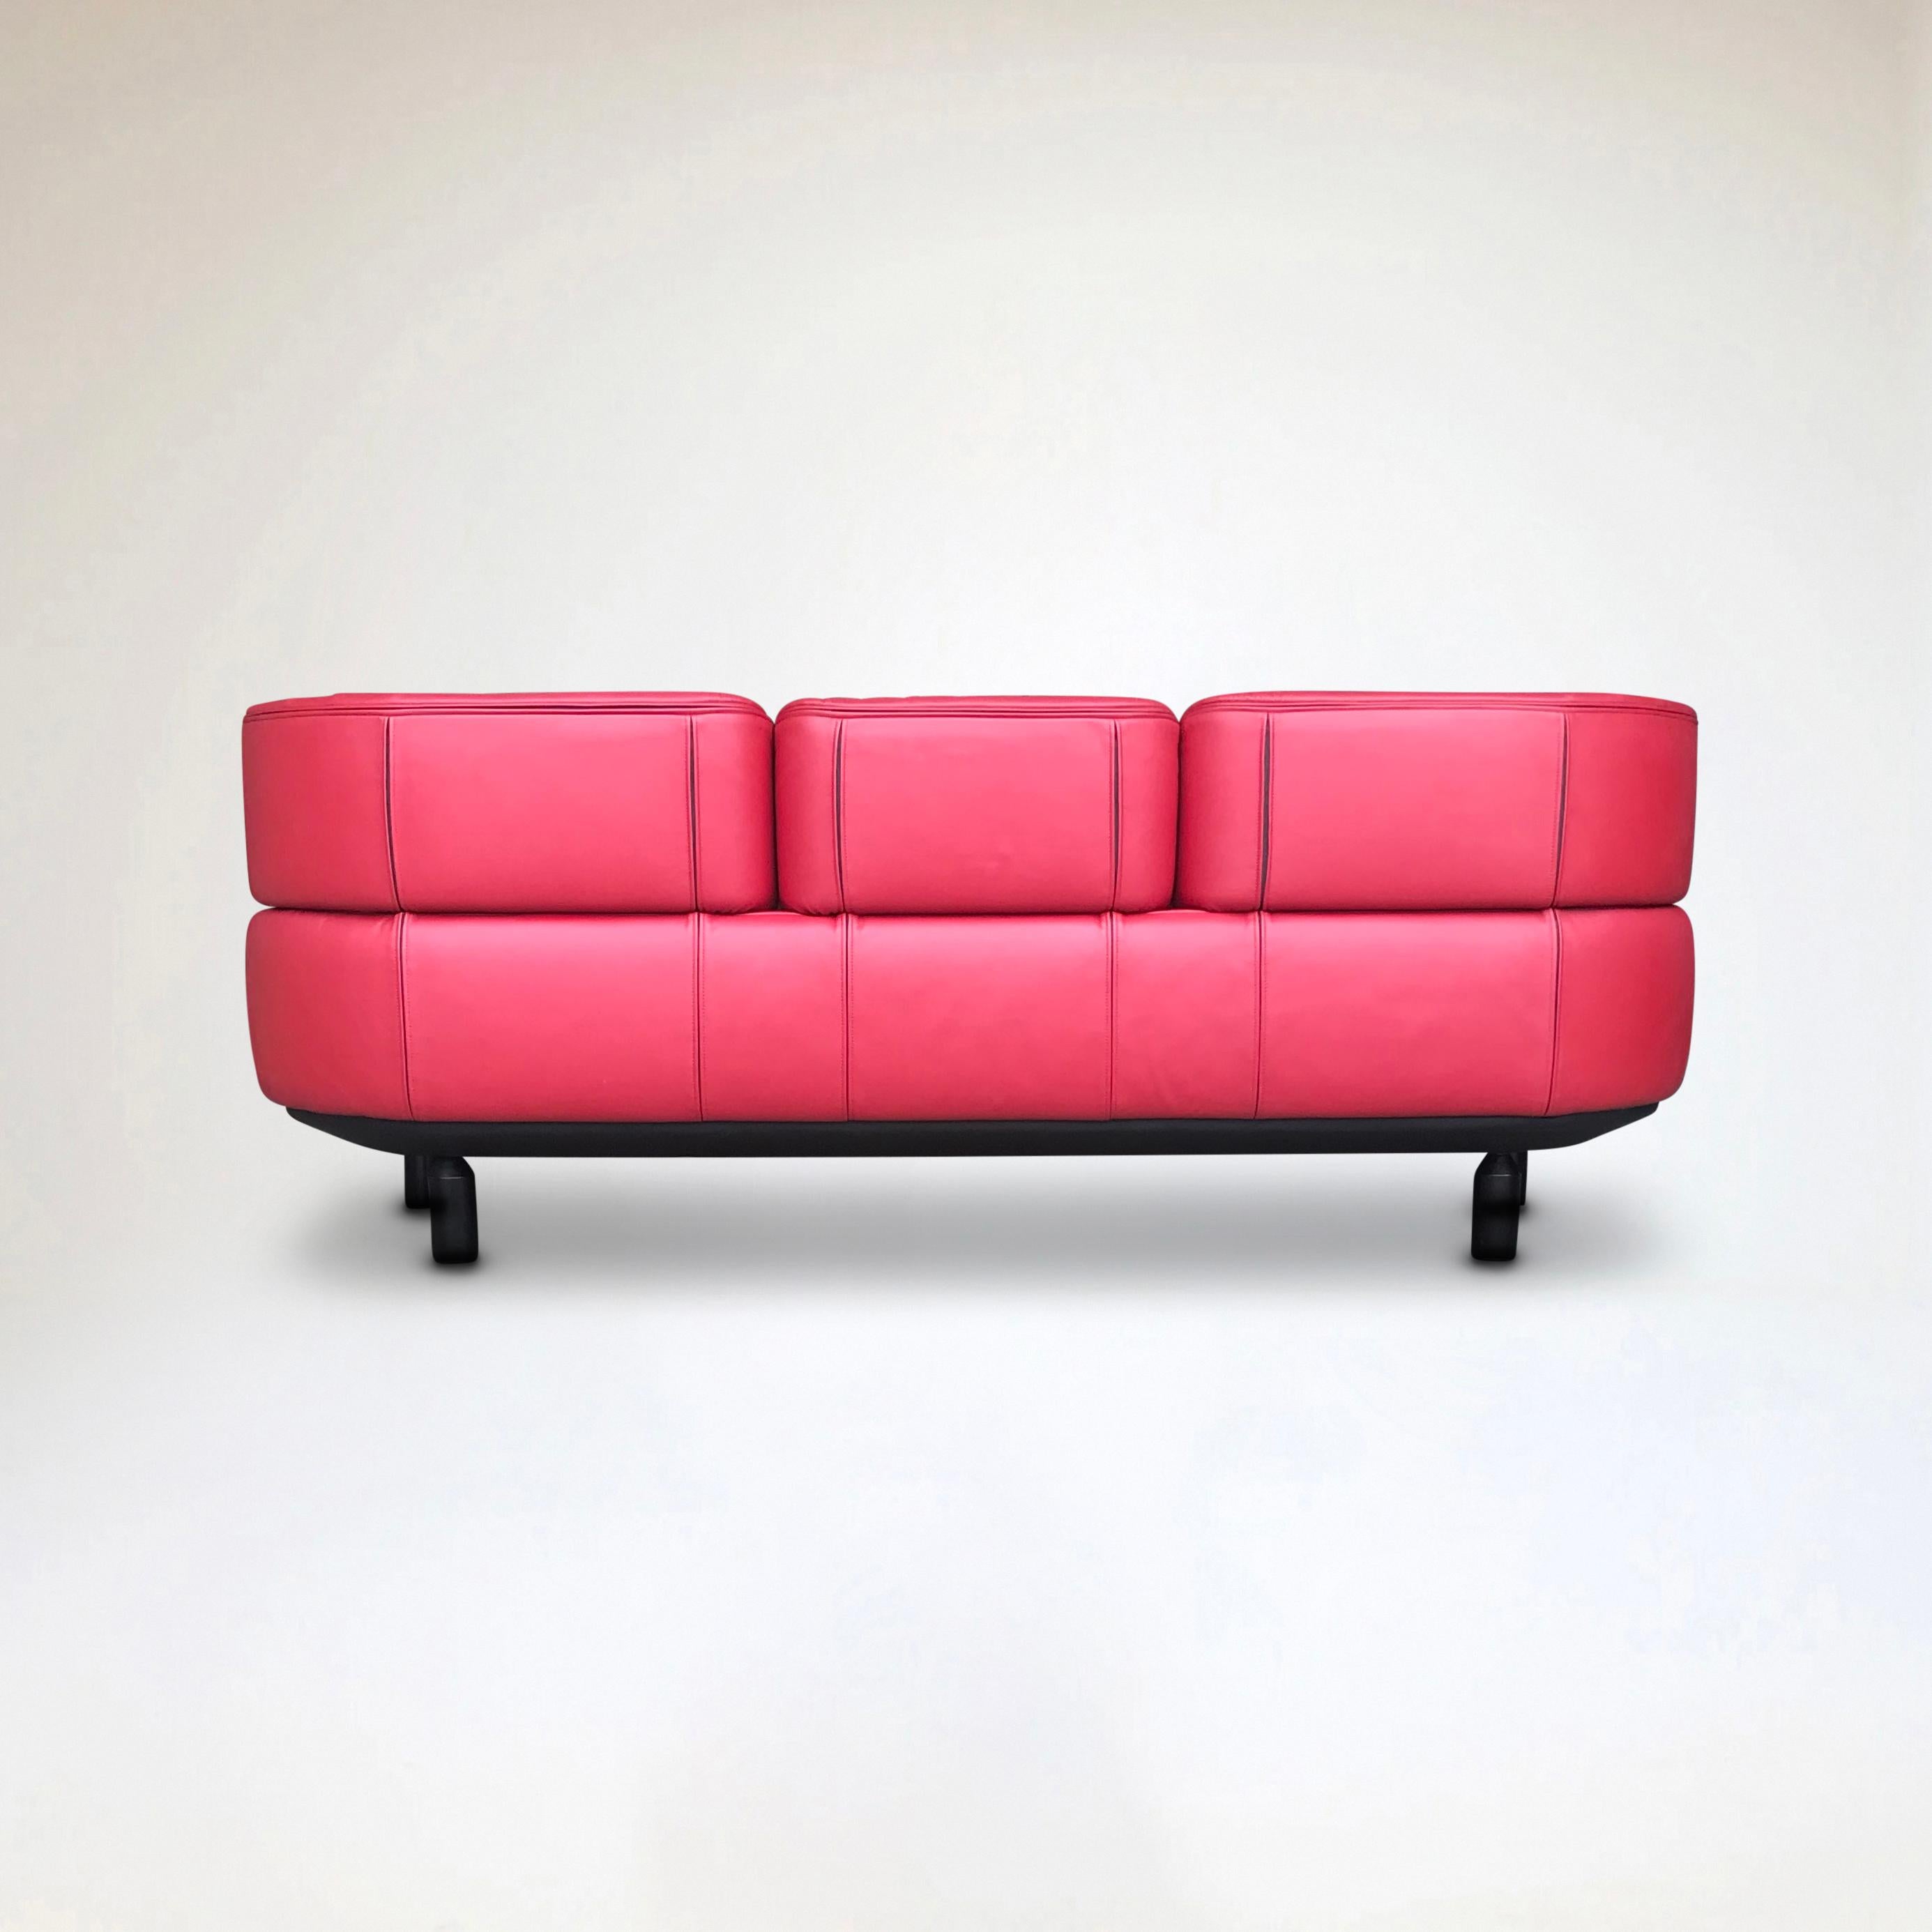 Bull 3-seater red leather sofa by Gianfranco Frattini for Cassina 1987 For Sale 7